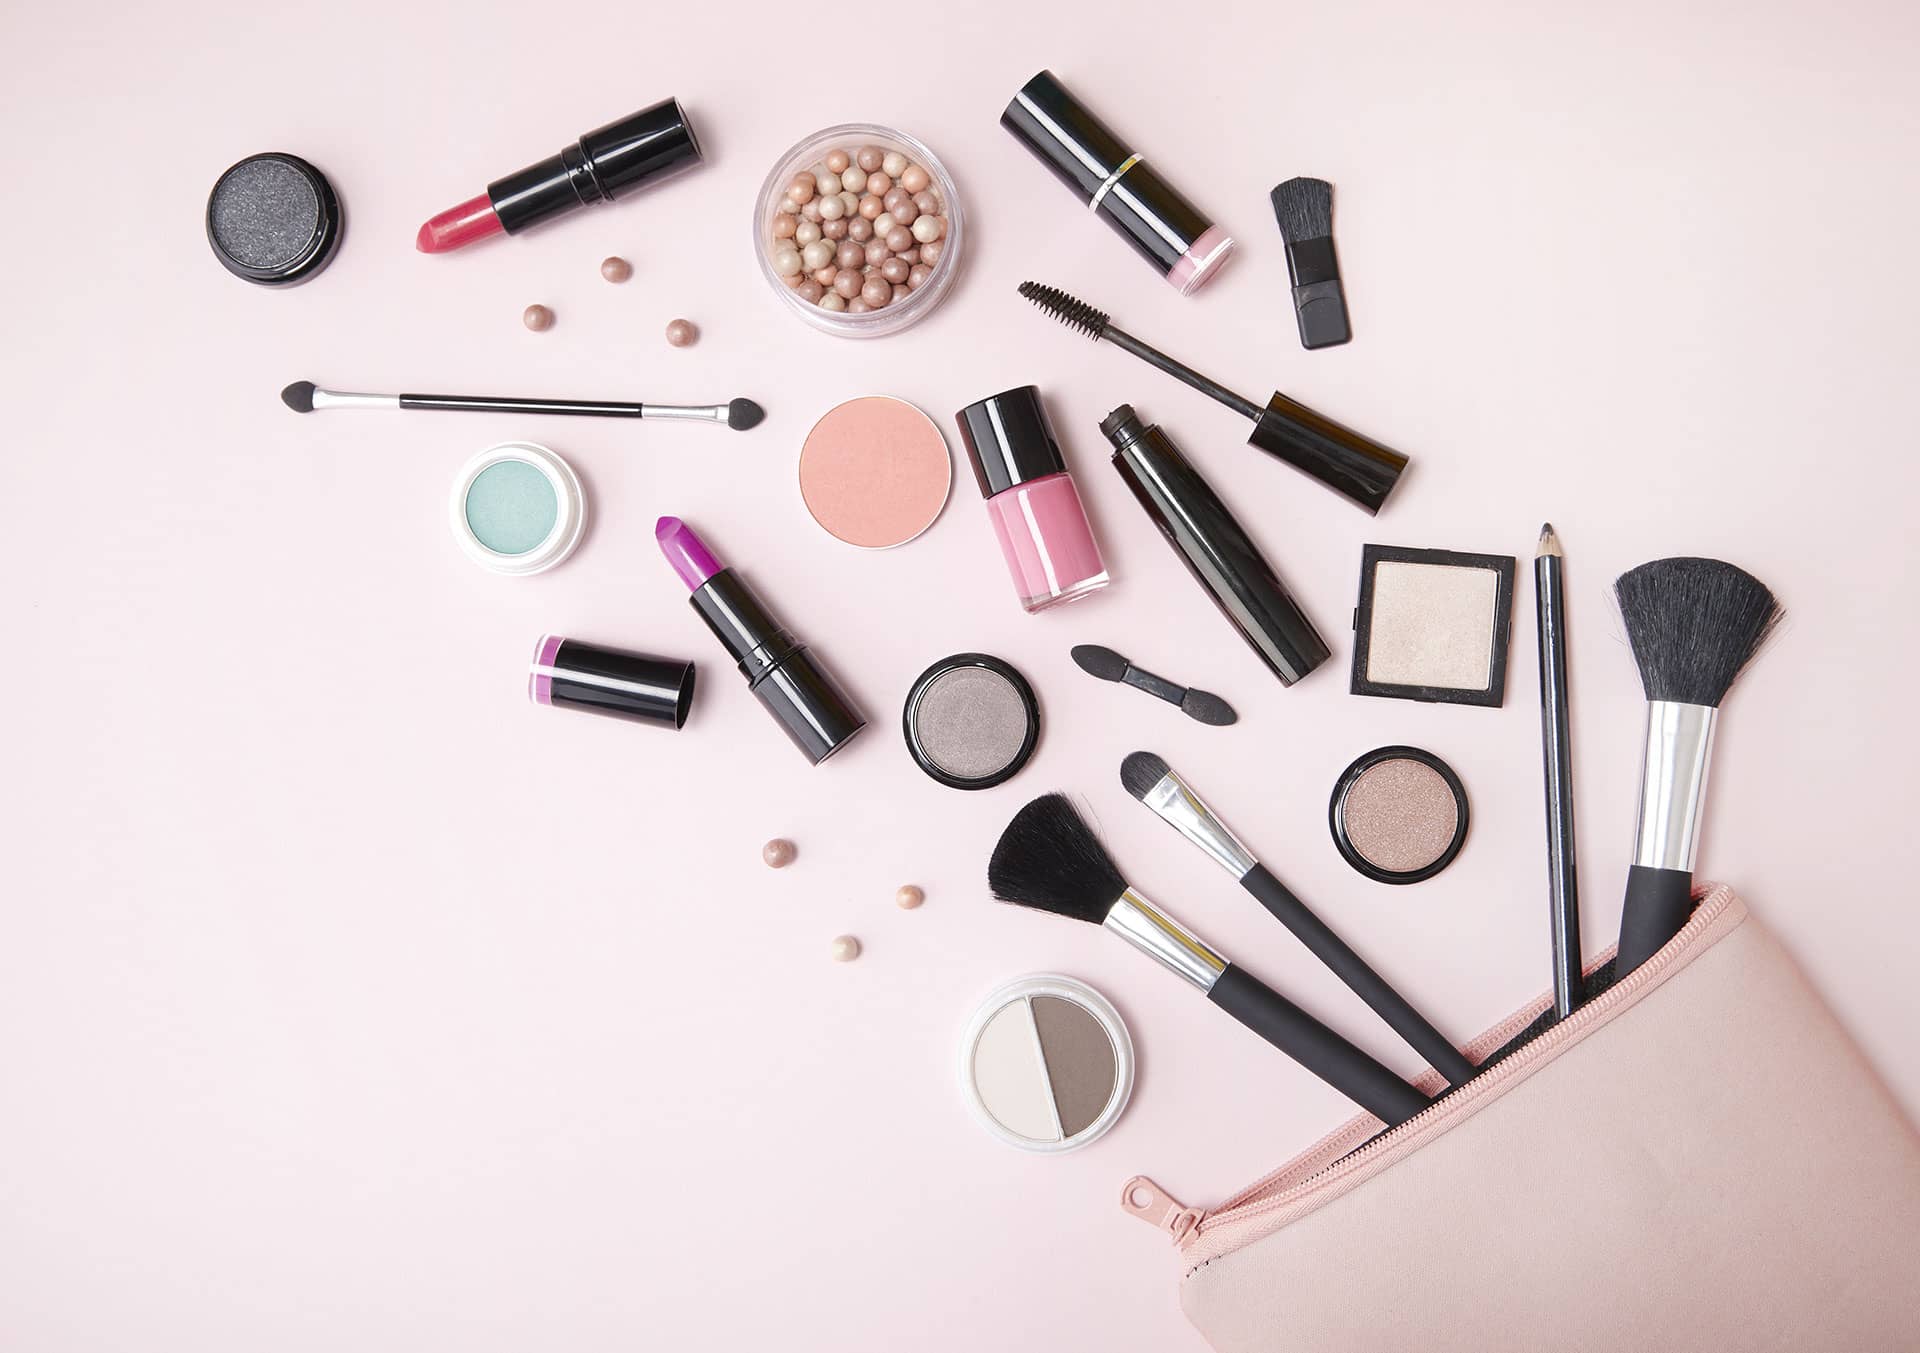 A variety of makeup products with endocrine disrupting chemicals and brushes spilling out of a bag